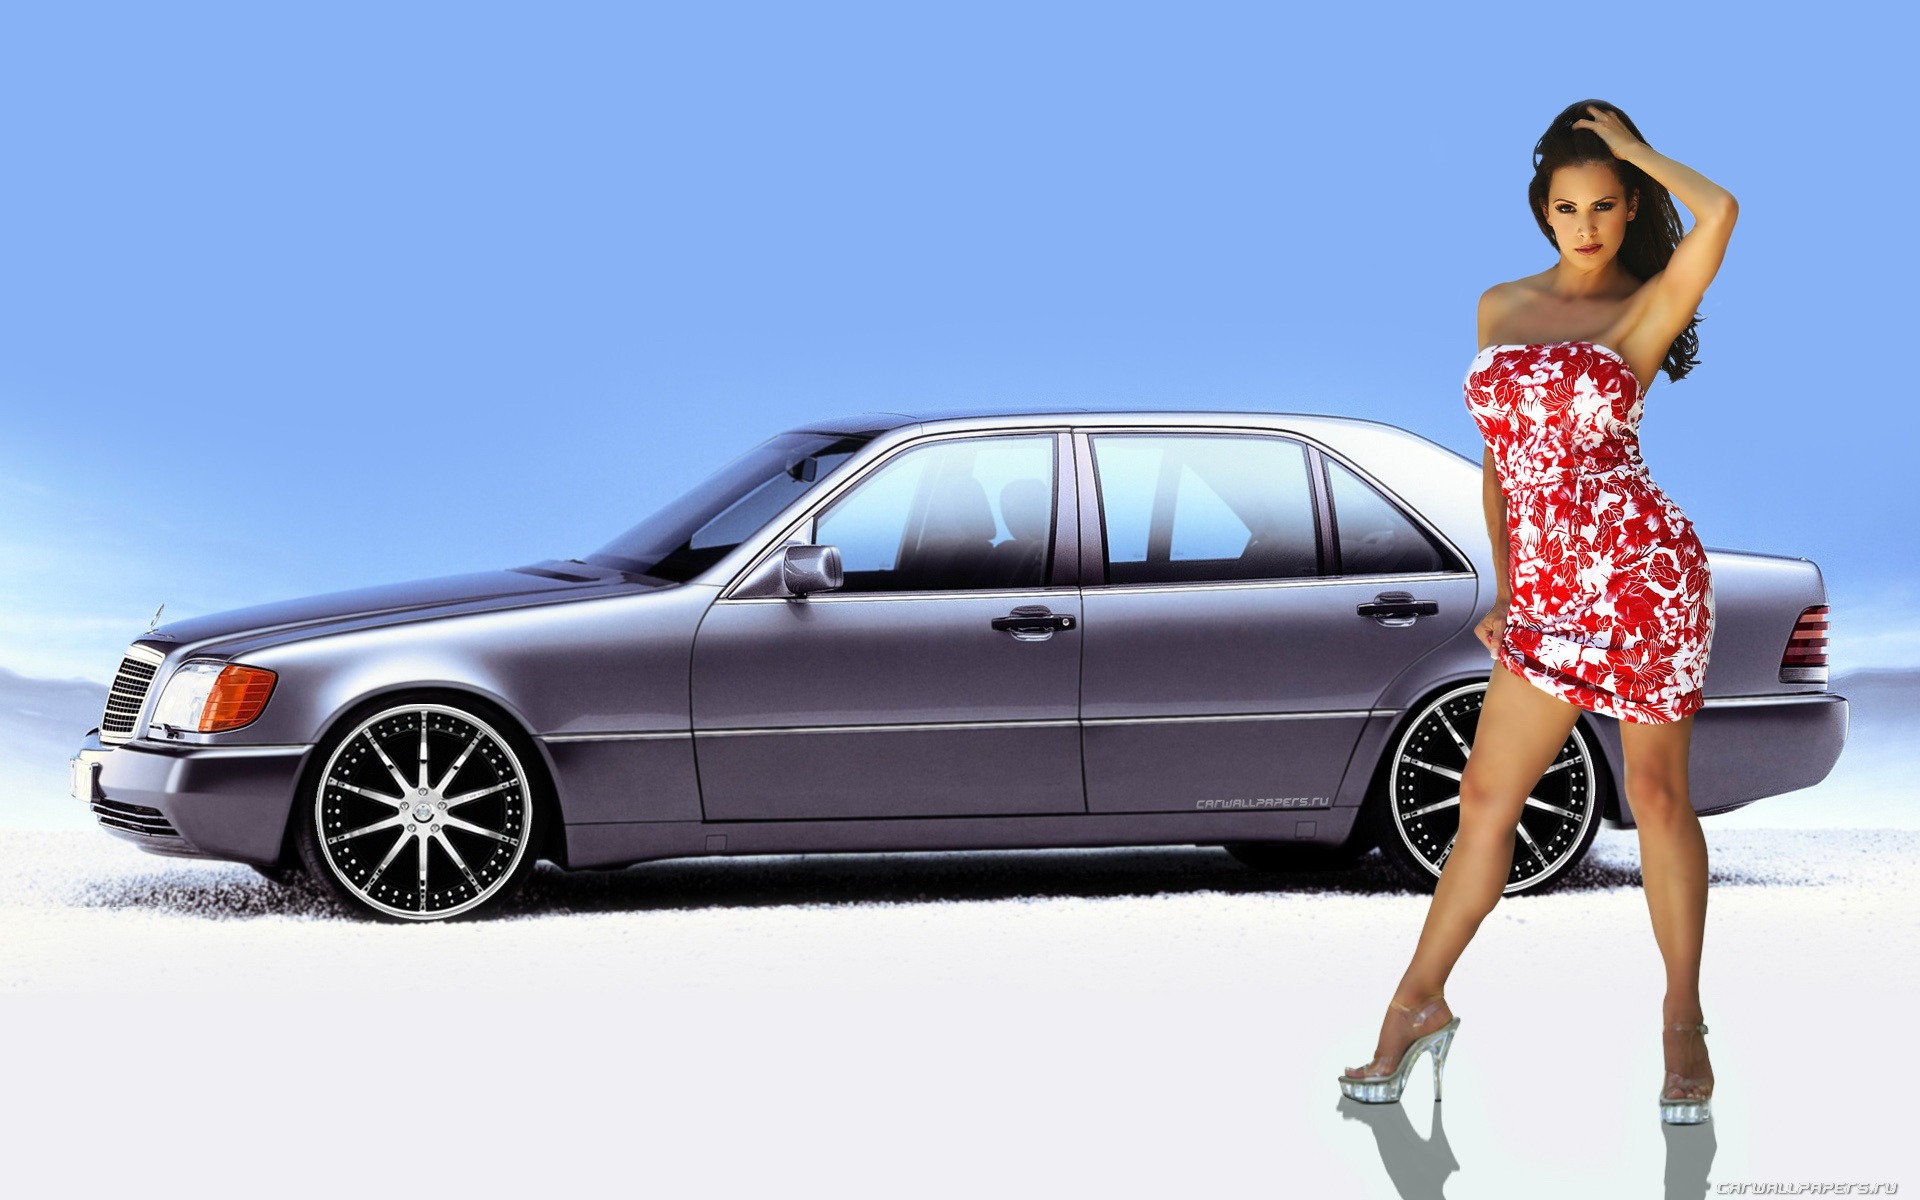 Cars and Girls wallpapers (1) #4 - 1920x1200